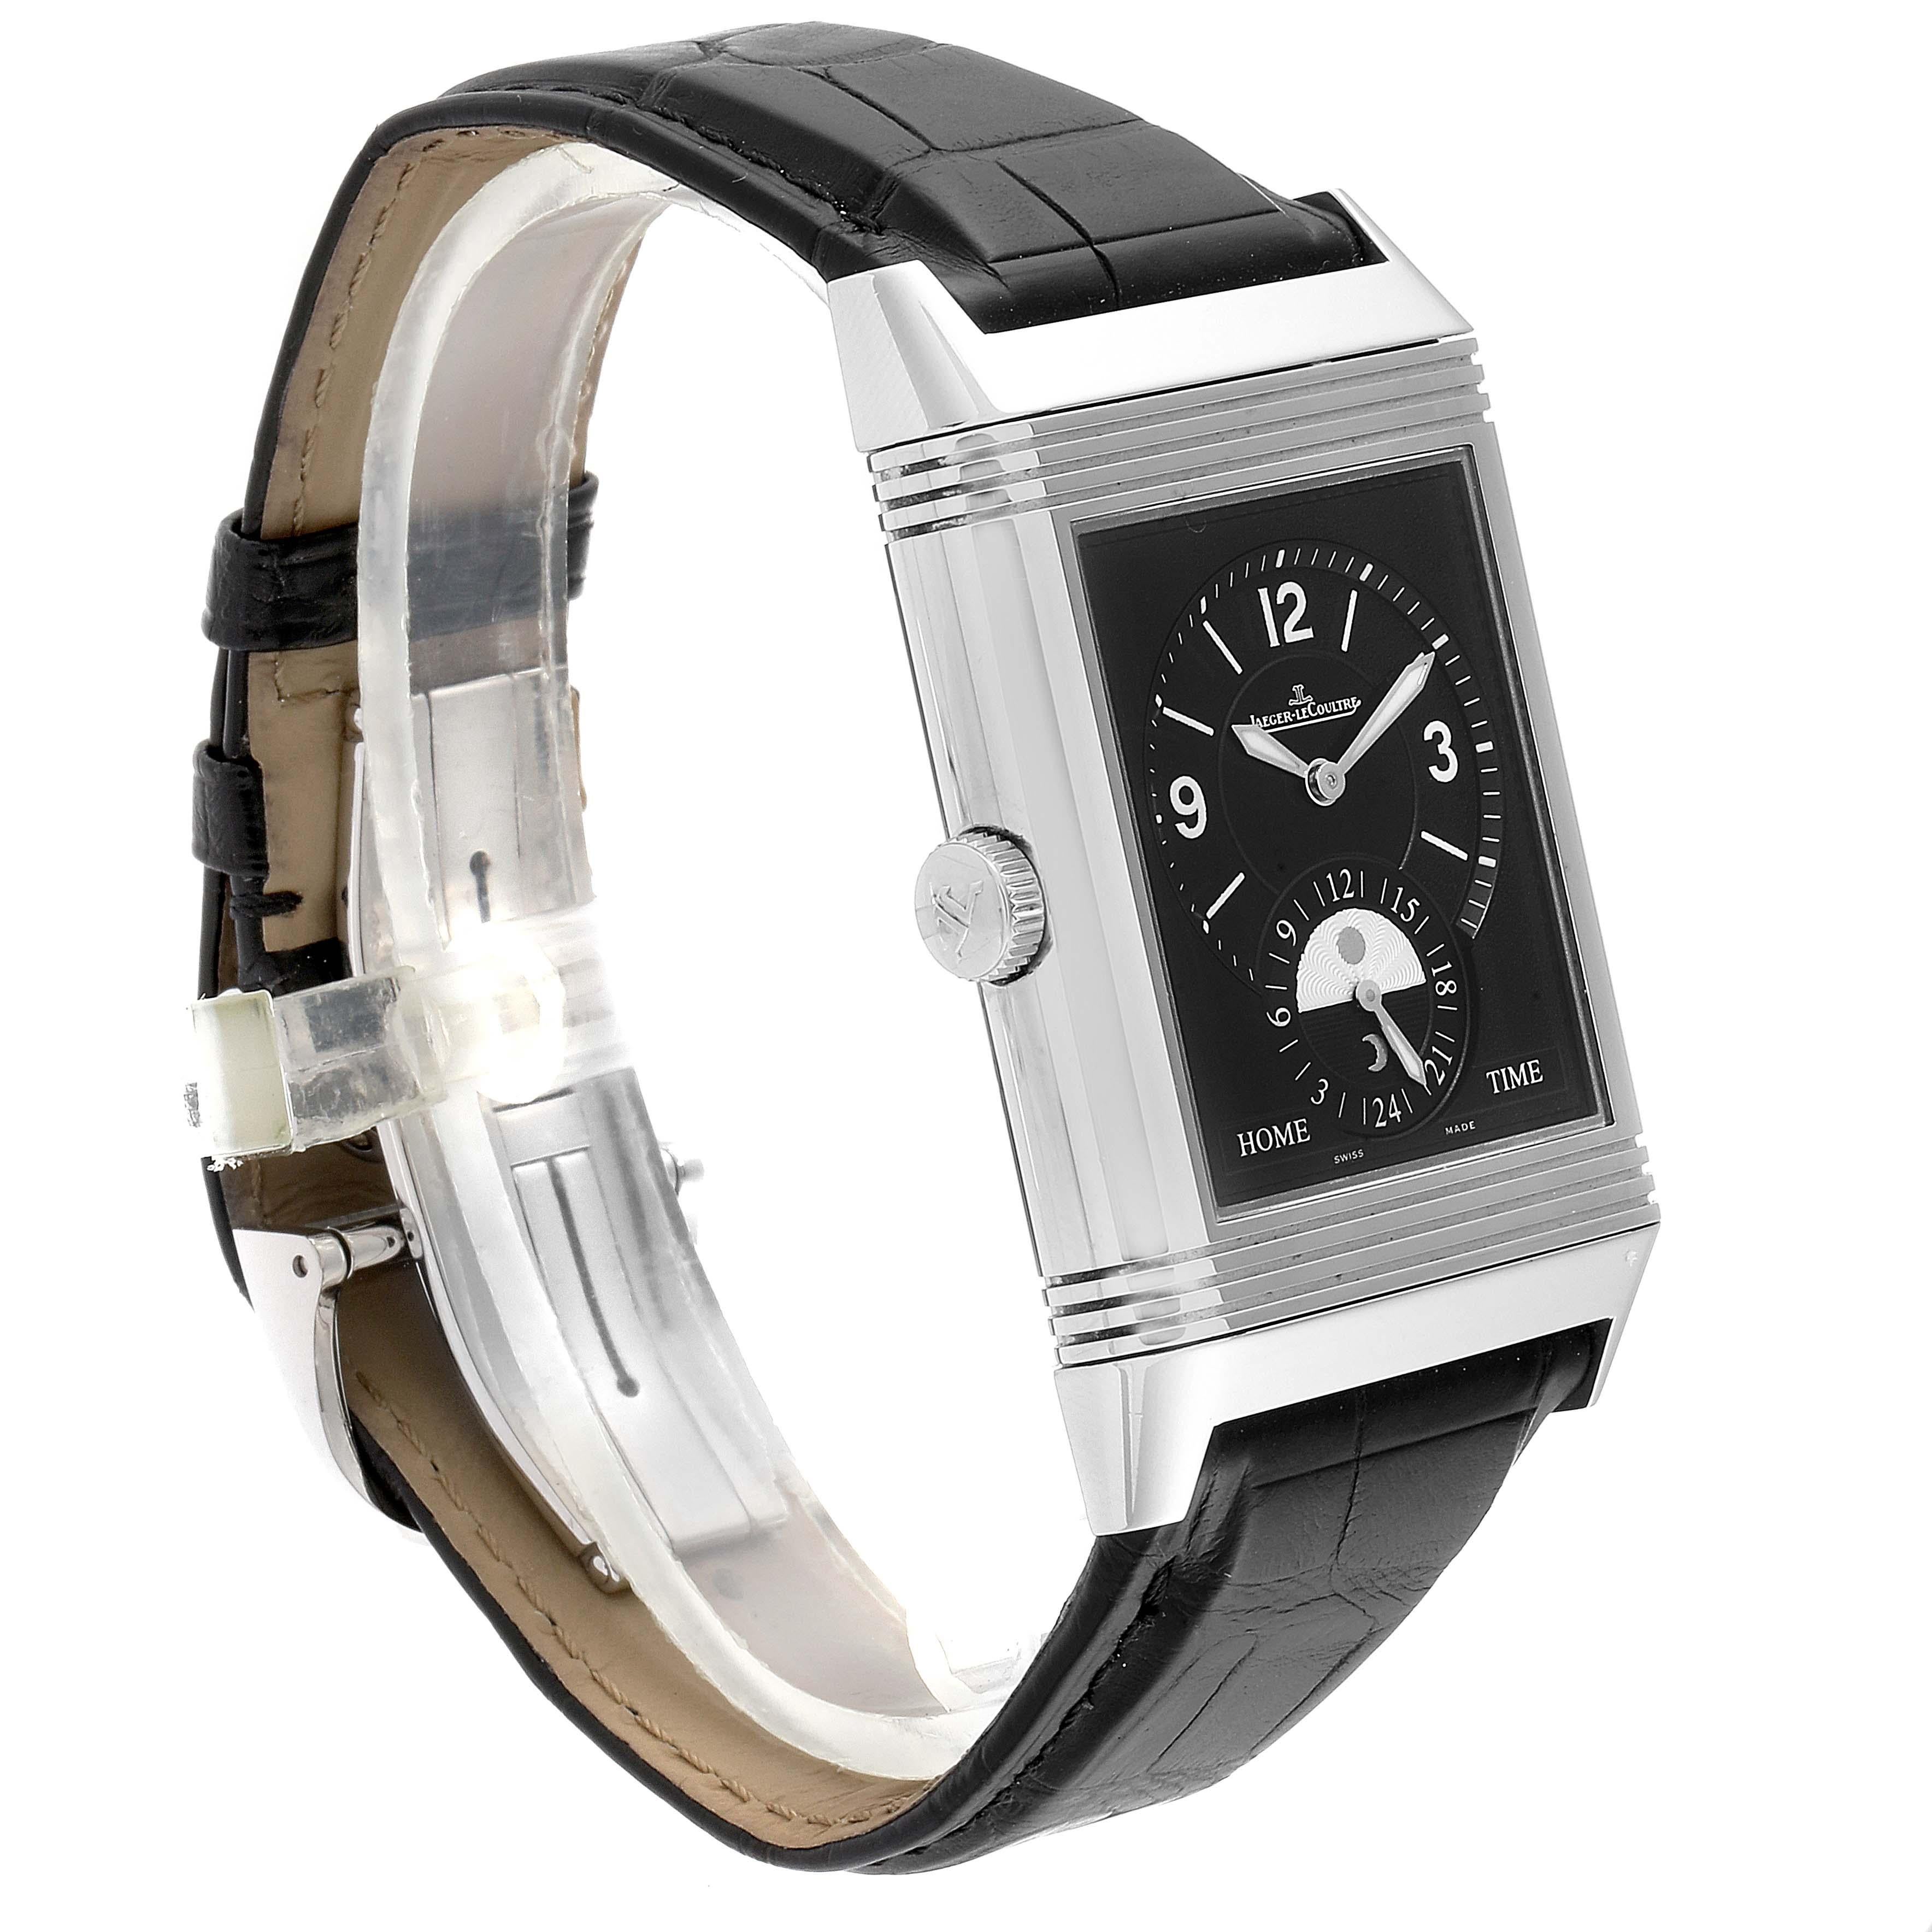 Art Deco Jaeger-LeCoultre Grande Reverso Duodate Limited Edition Watch 274.8.85